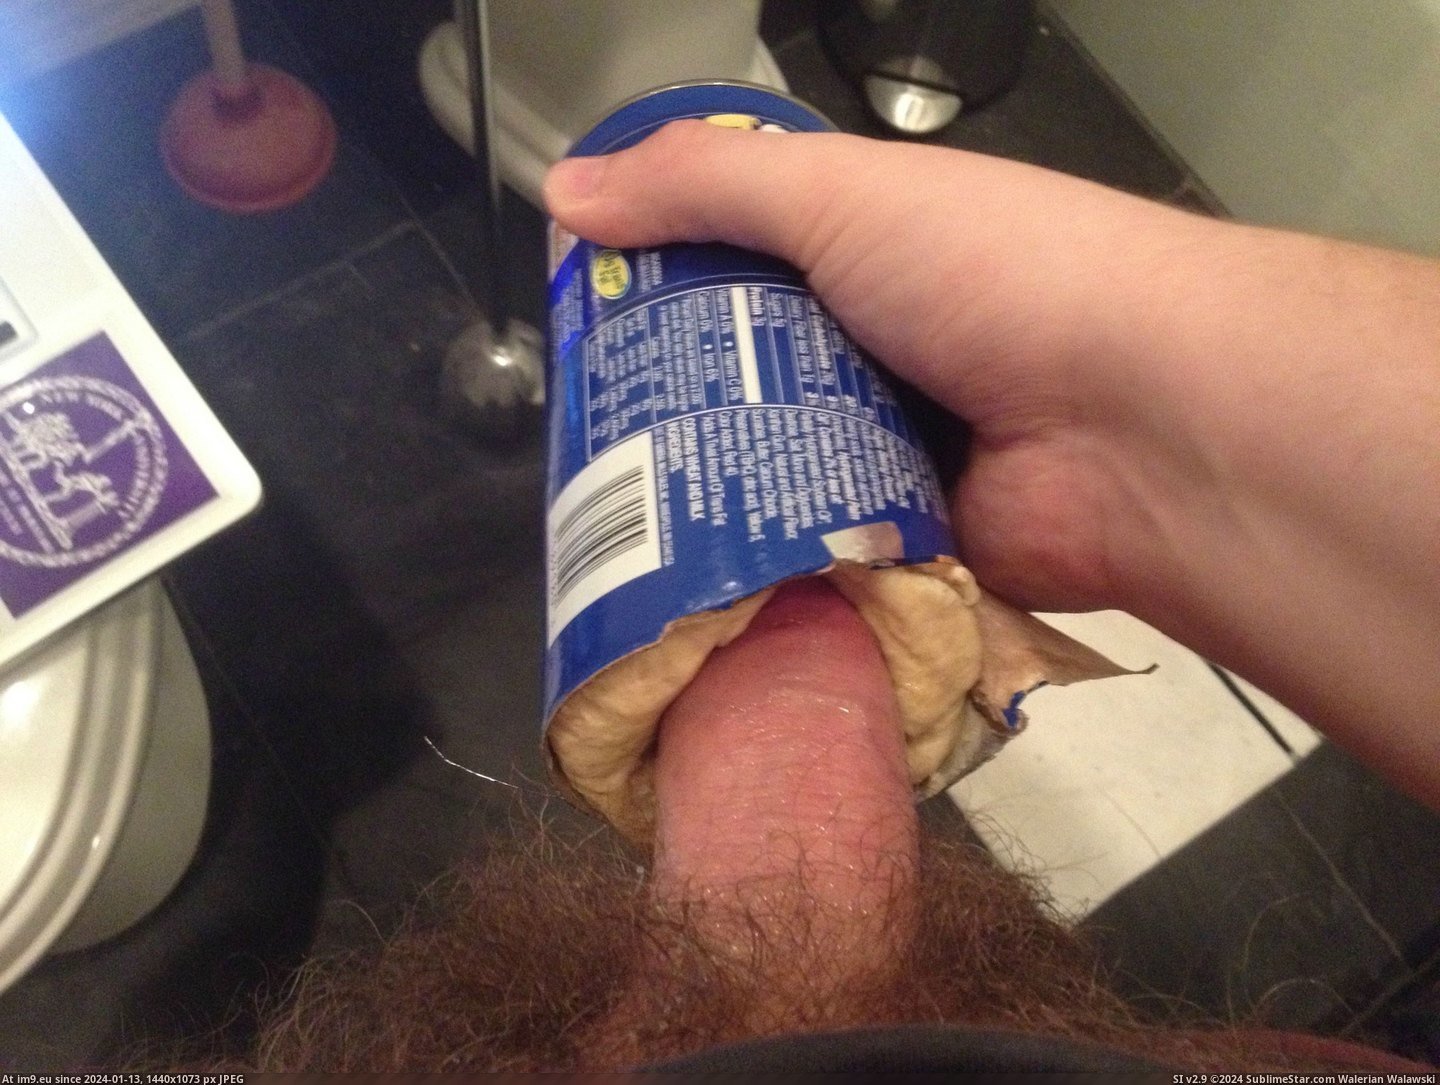 #Wtf #Can #Jerk #Grands #Pillsbury #Off #Redditor [Wtf] Redditor uses can of Pillsbury Grands to jerk off. [NSFW obviously] 3 Pic. (Изображение из альбом My r/WTF favs))